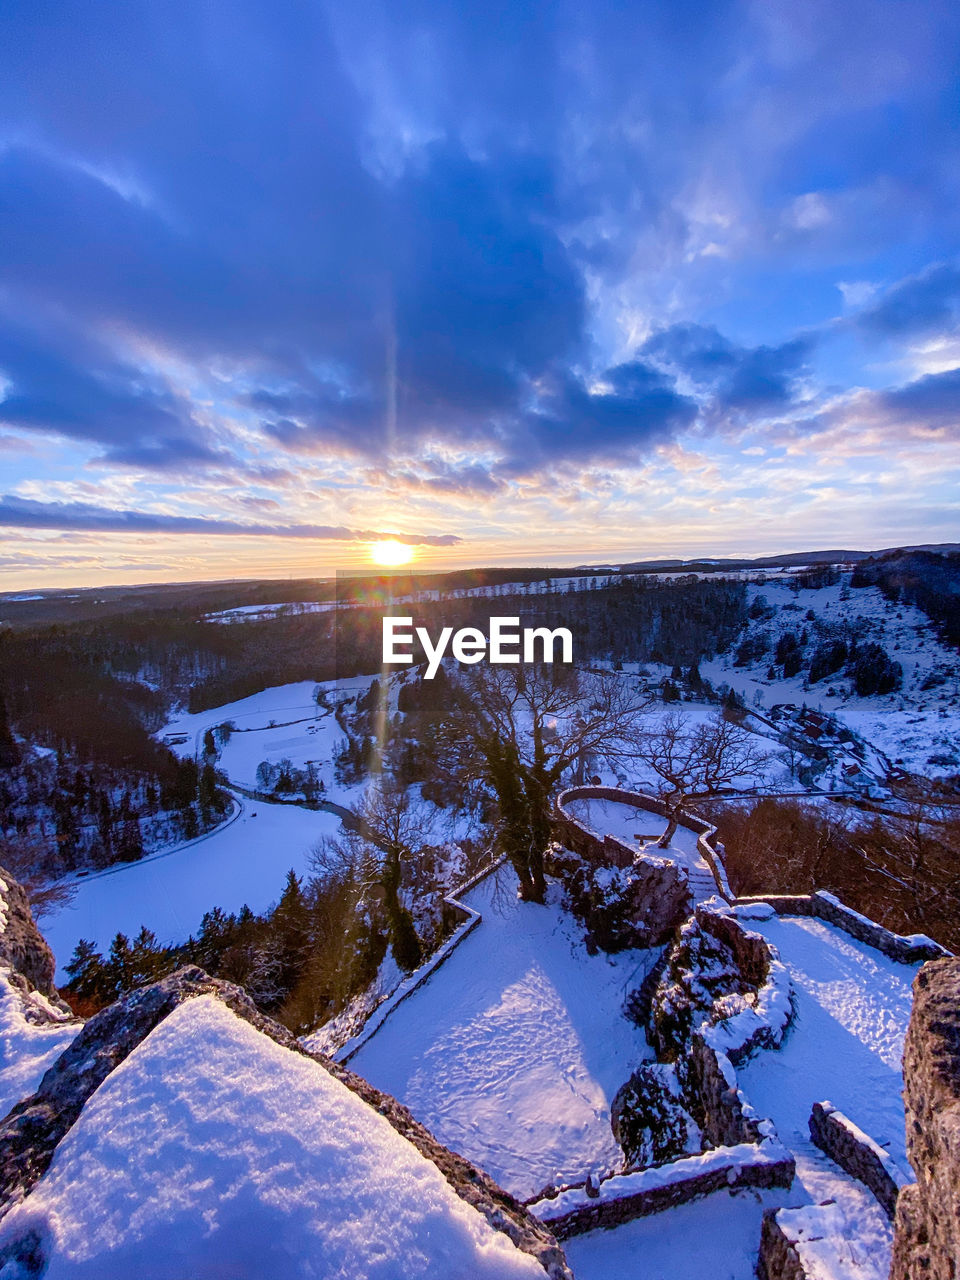 SNOW COVERED LANDSCAPE AGAINST SKY DURING SUNSET